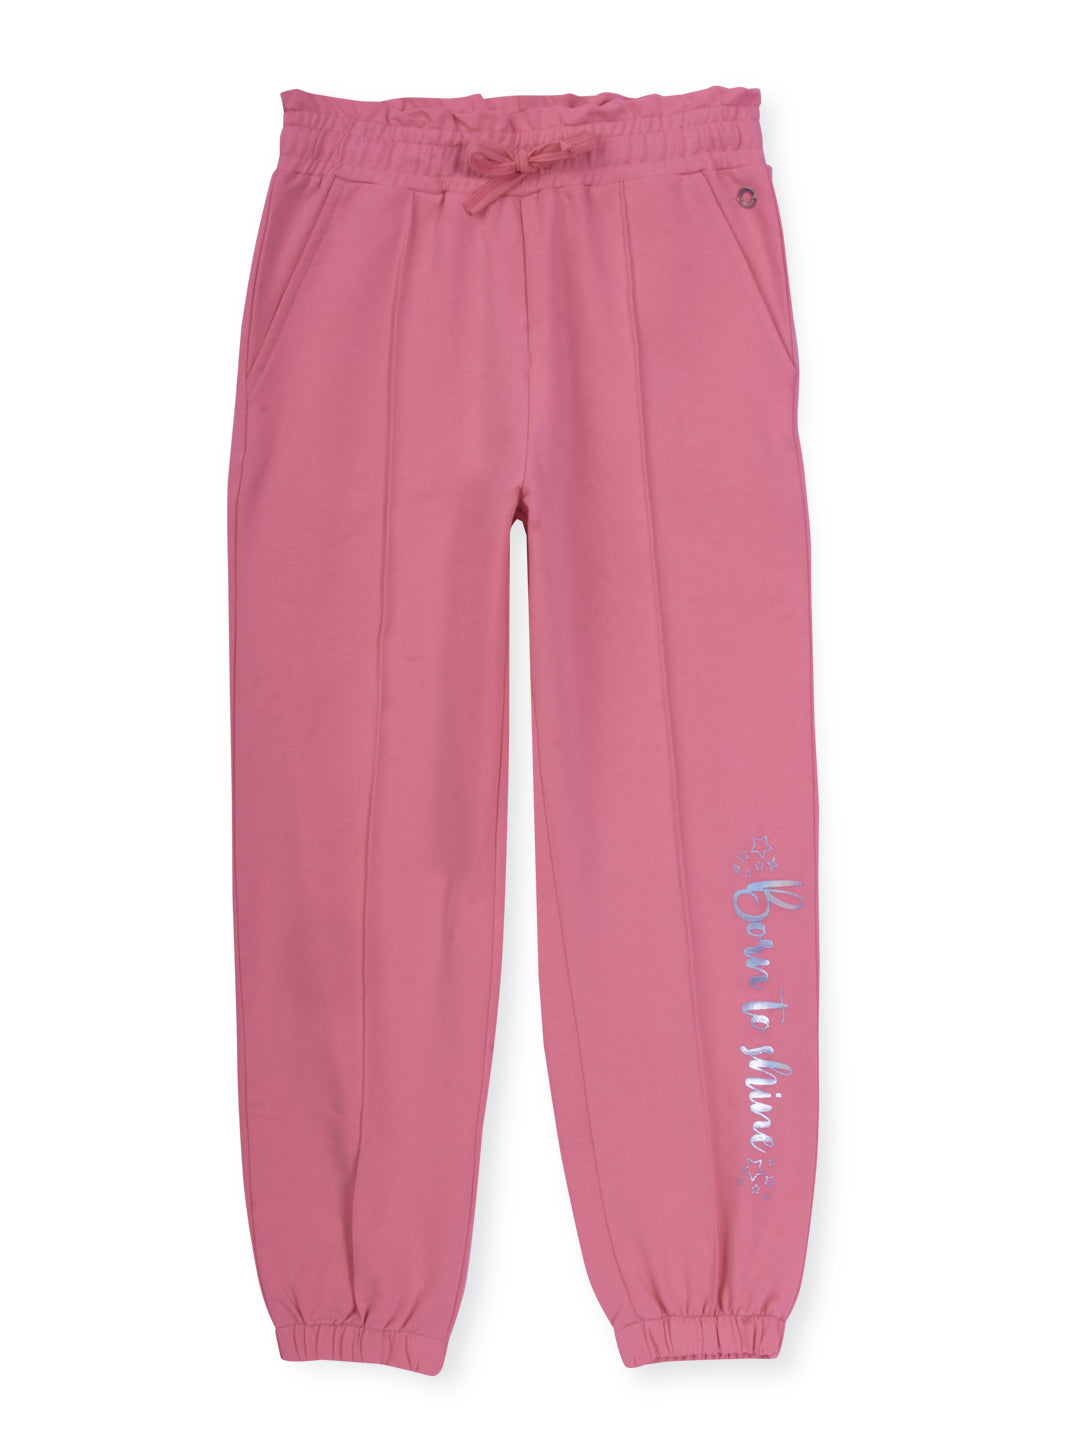 Girls Pink Cotton Solid Track Pant